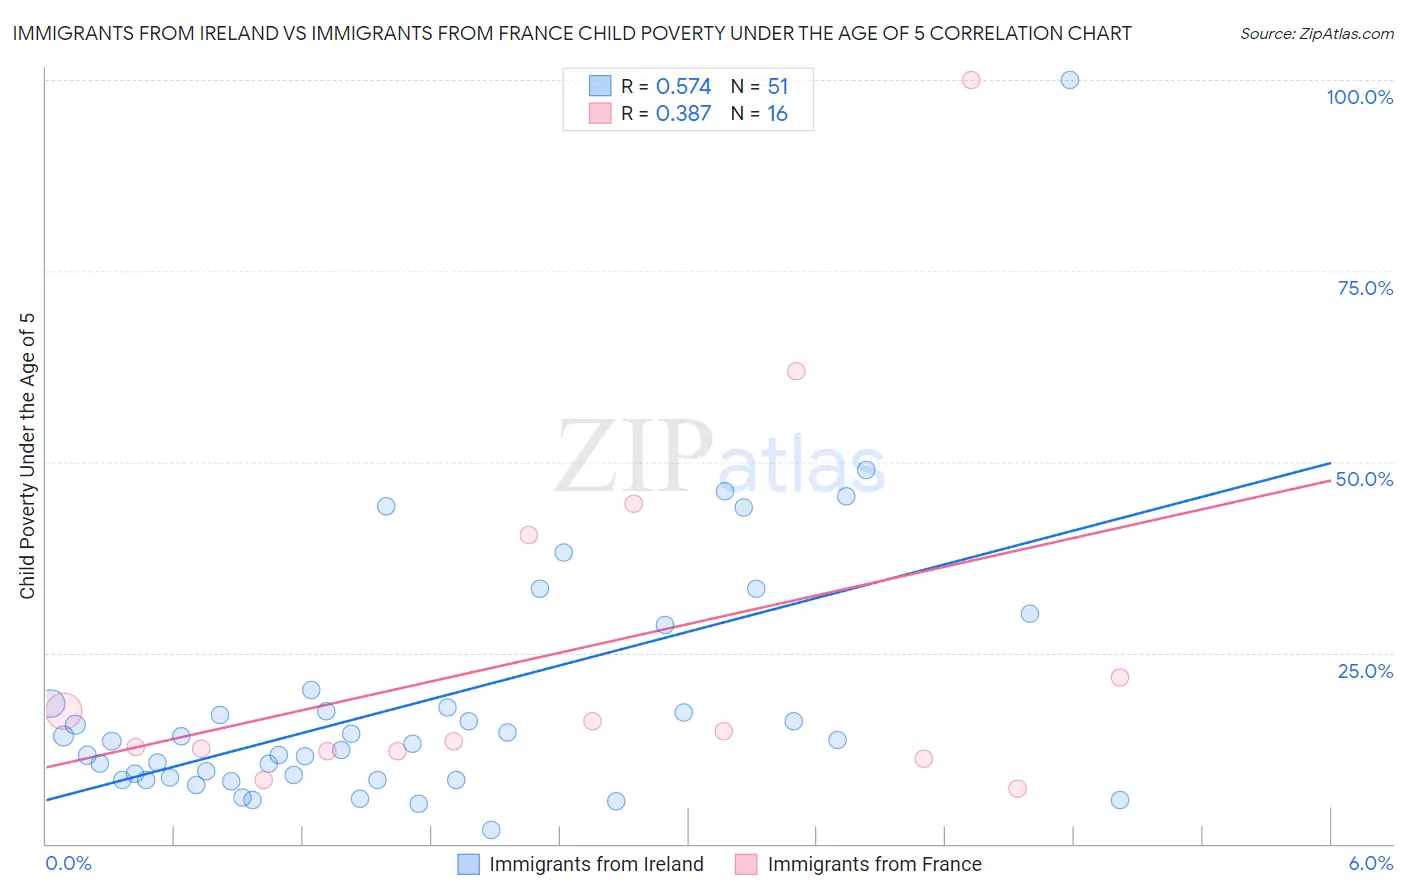 Immigrants from Ireland vs Immigrants from France Child Poverty Under the Age of 5